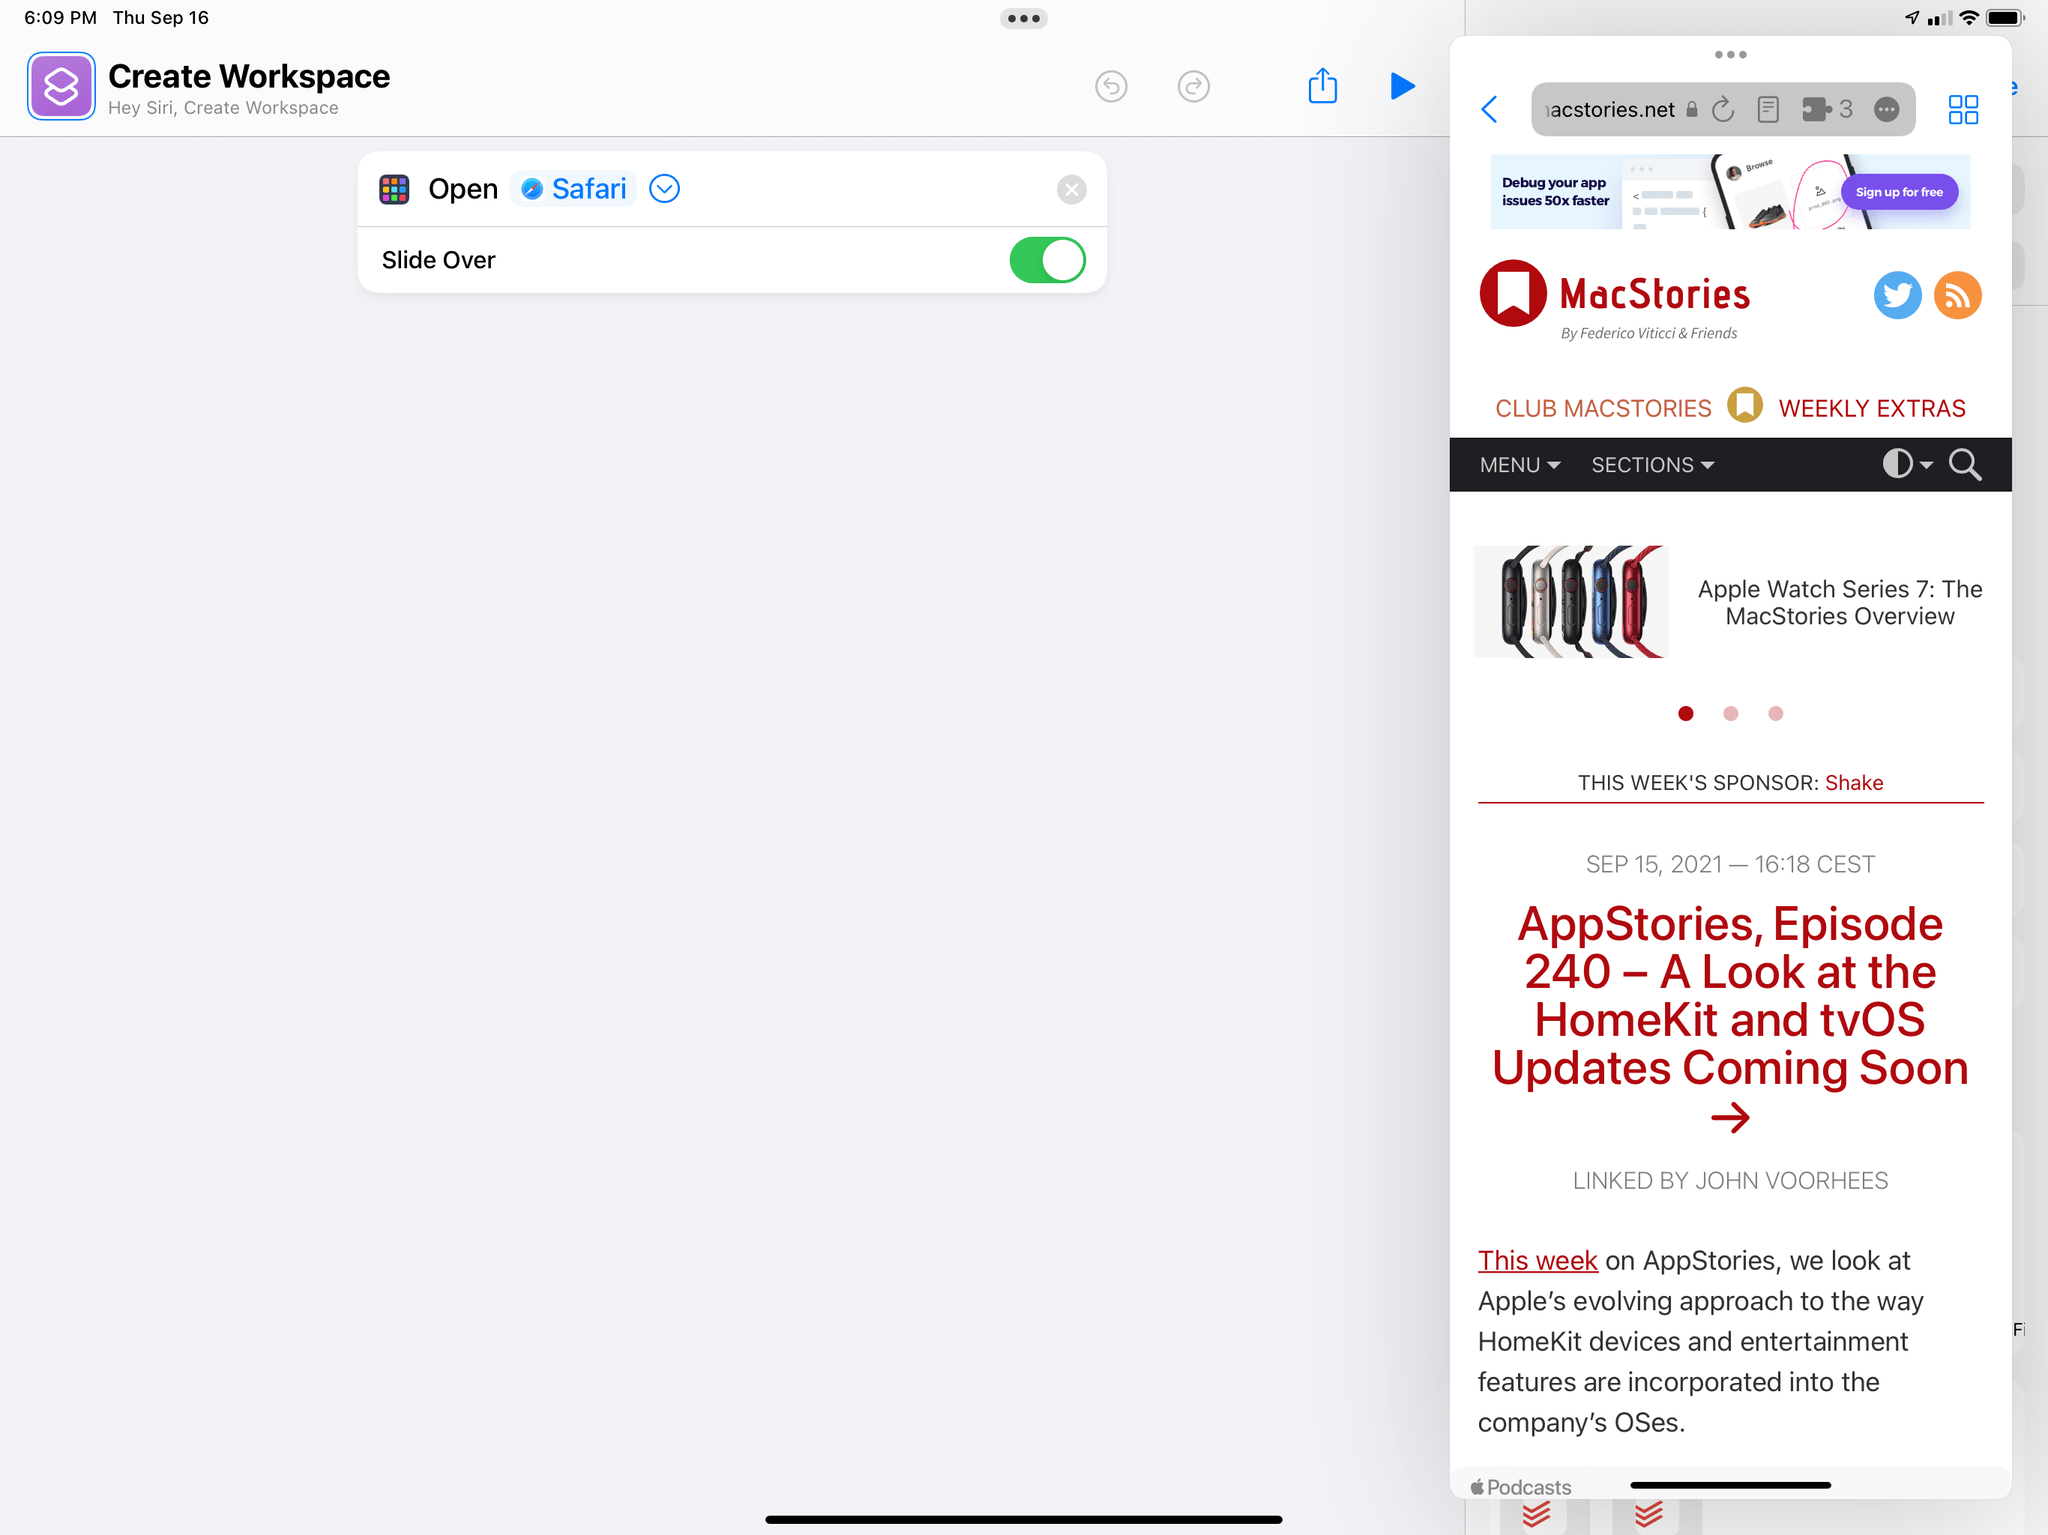 You can now open specific apps in Slide Over.